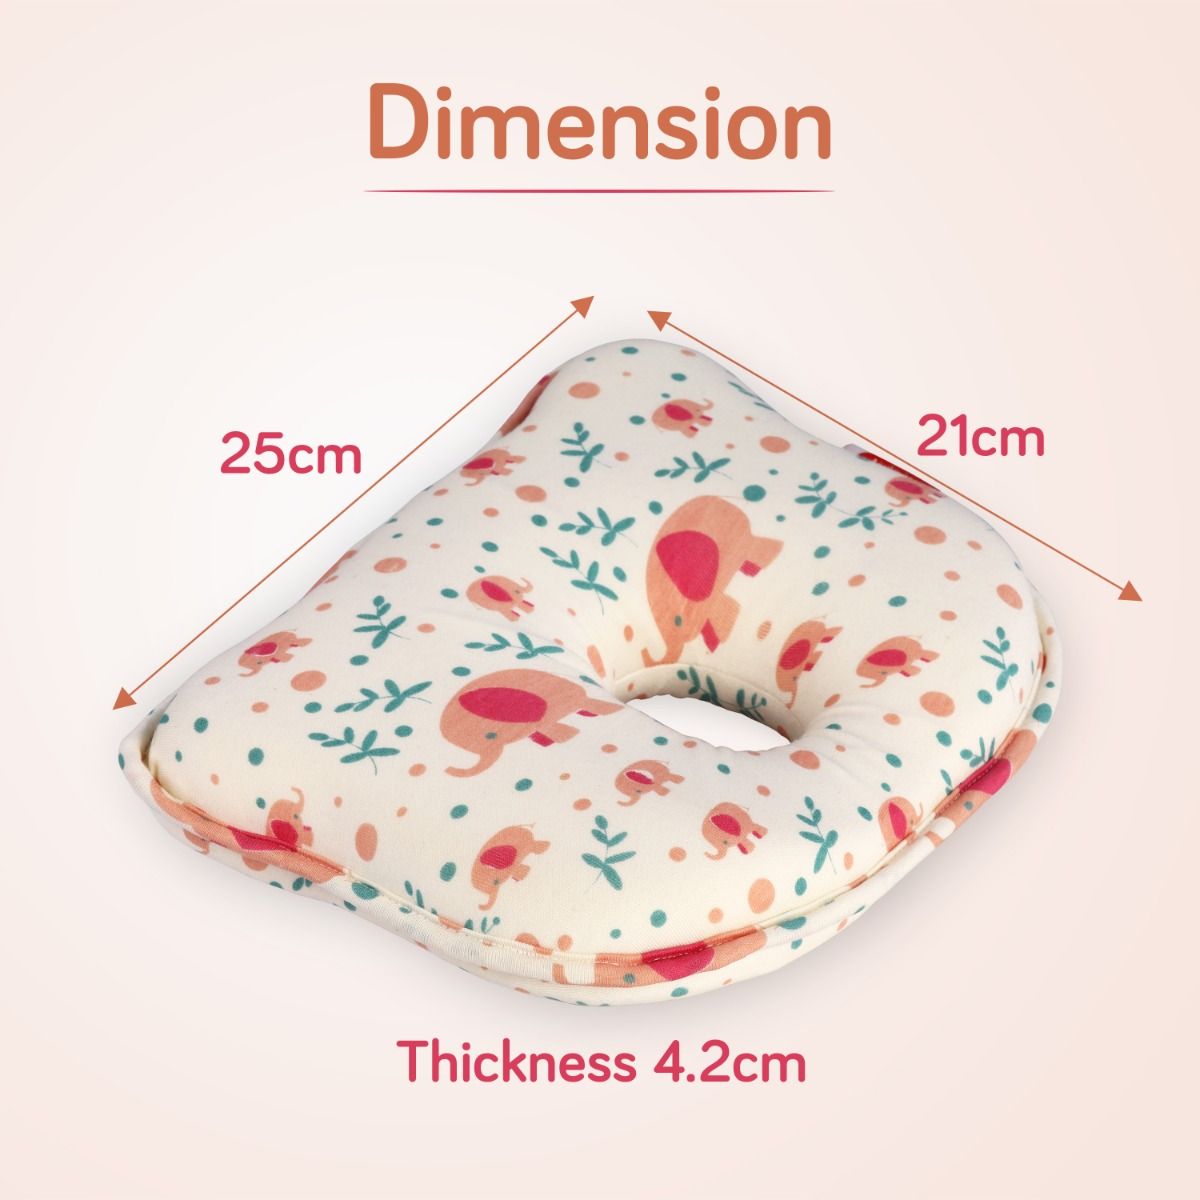 Memory Foam Baby Head Shaping Pillow Bunny Shape, Floral Print (Pink)